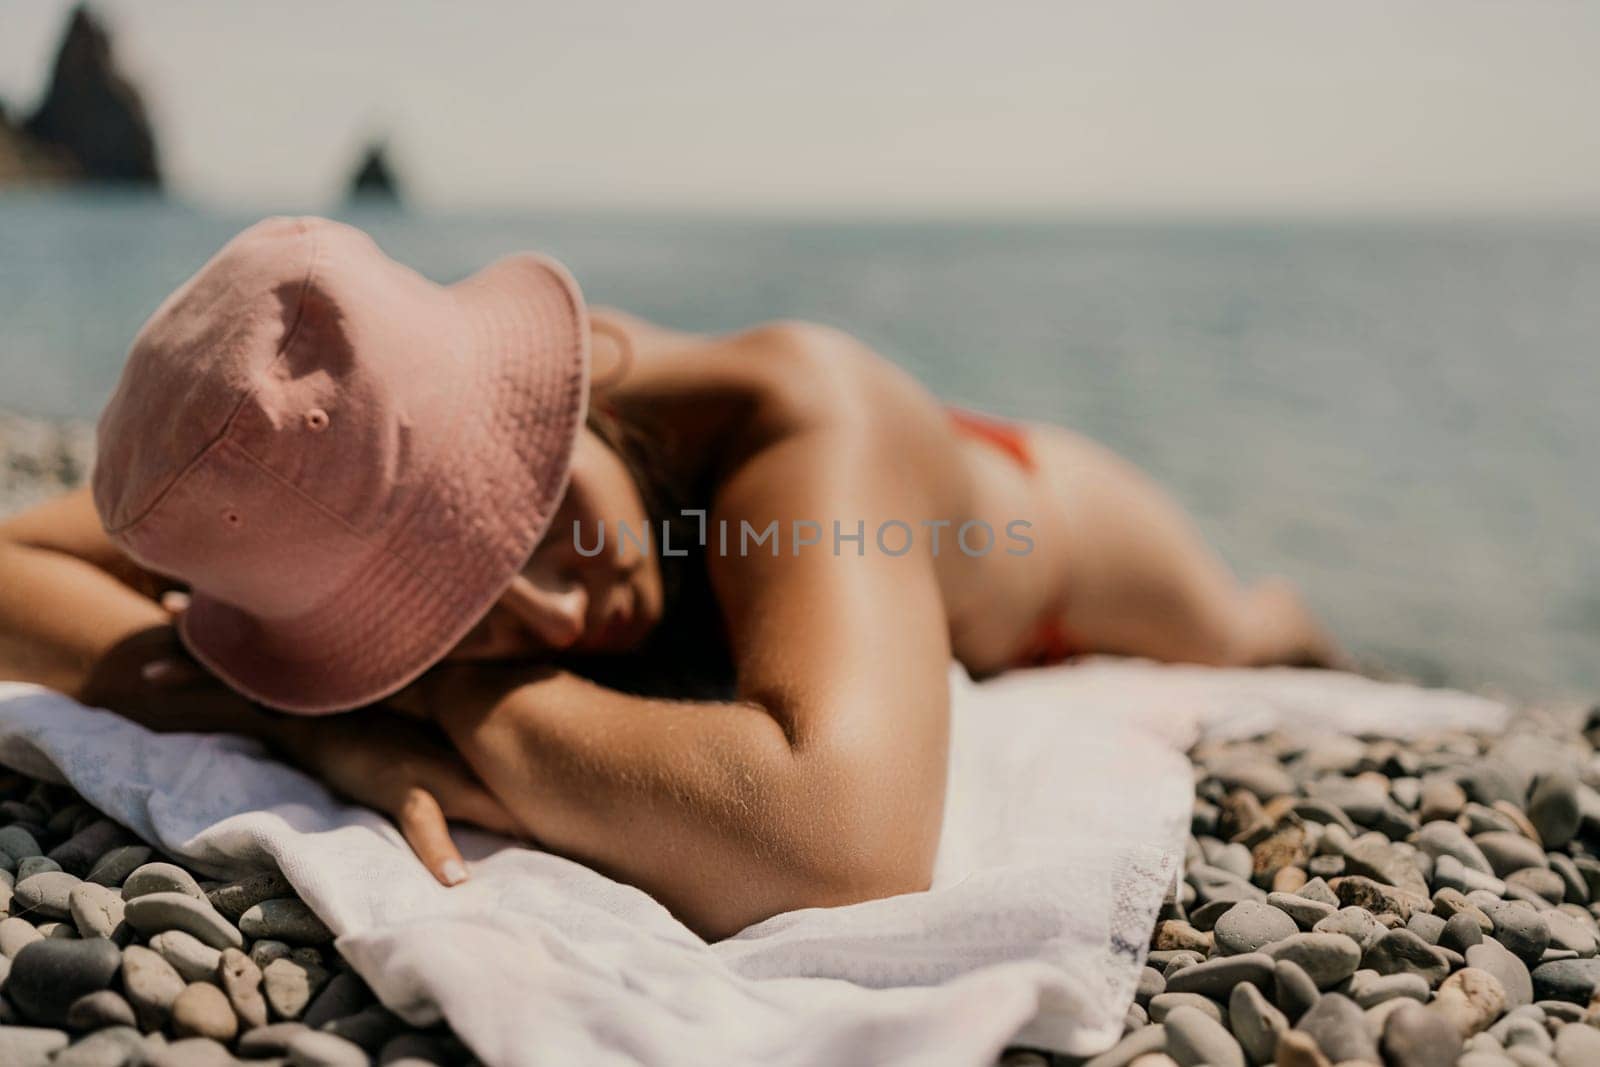 A woman sunbathes on the beach, lying on her stomach in a red swimsuit against the sea backdrop